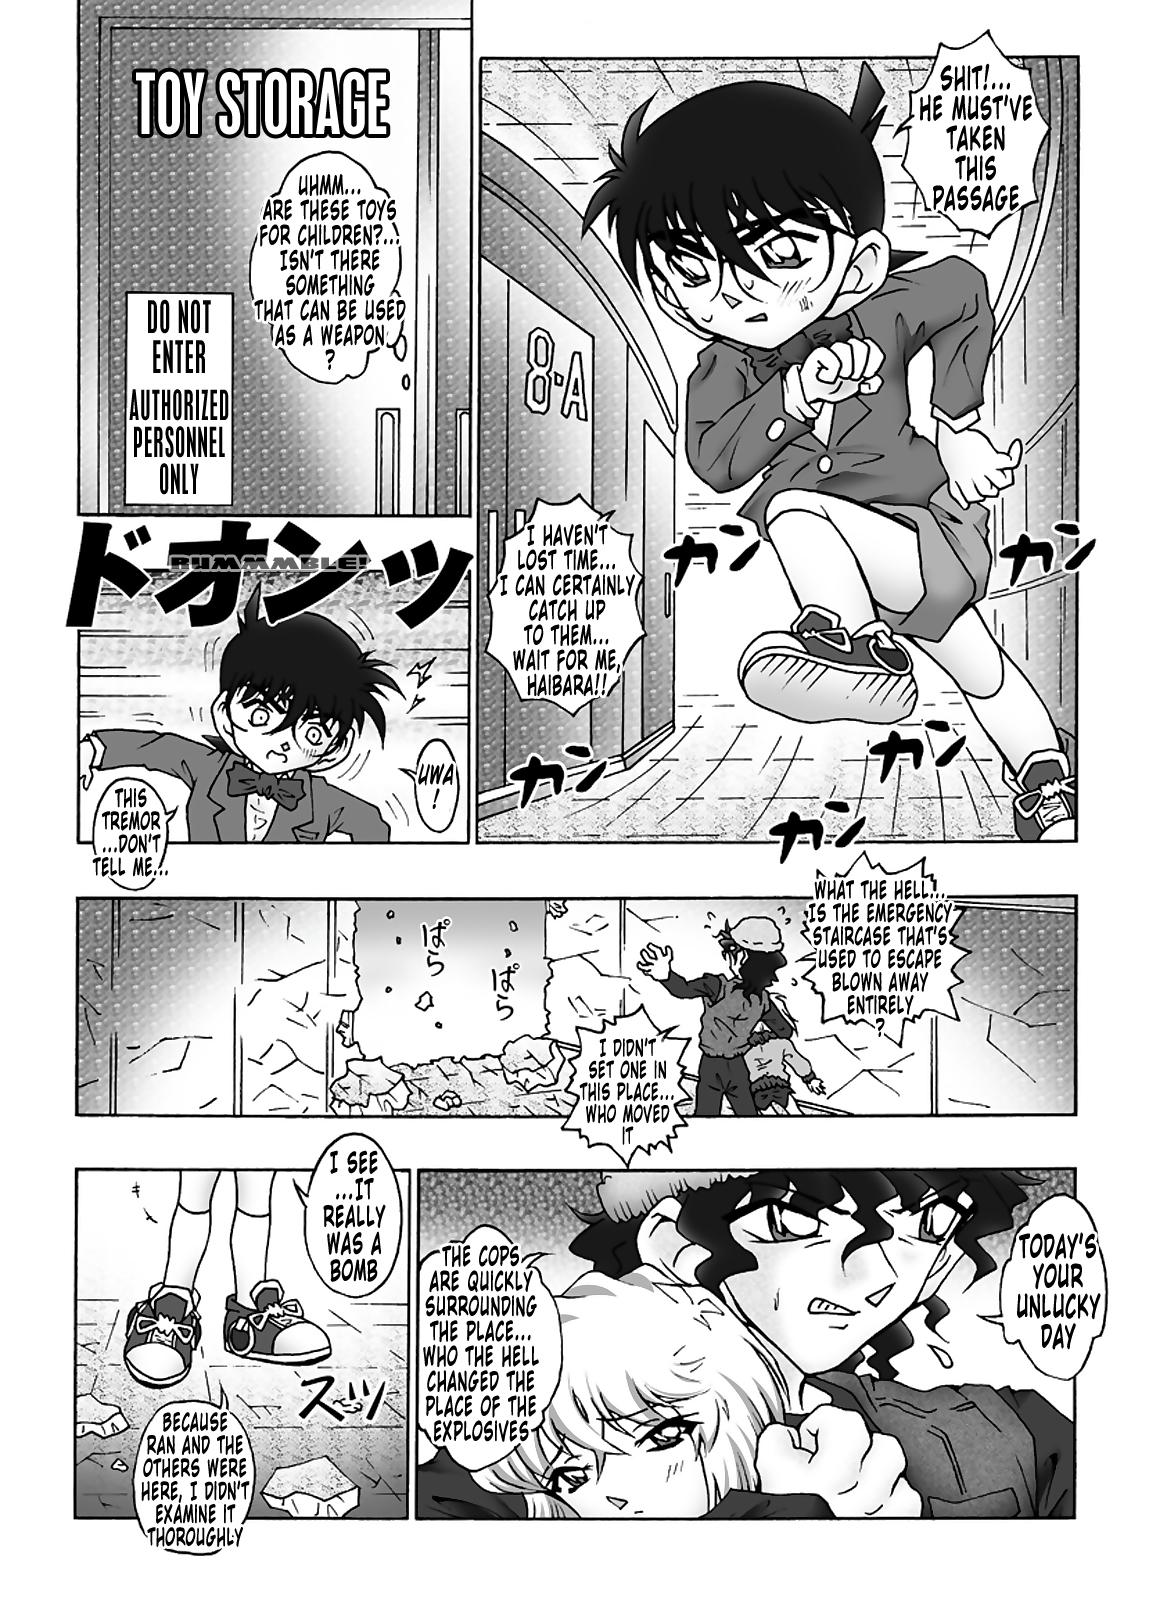 Bumbling Detective Conan - File 8: The Case Of The Die Hard Day 12